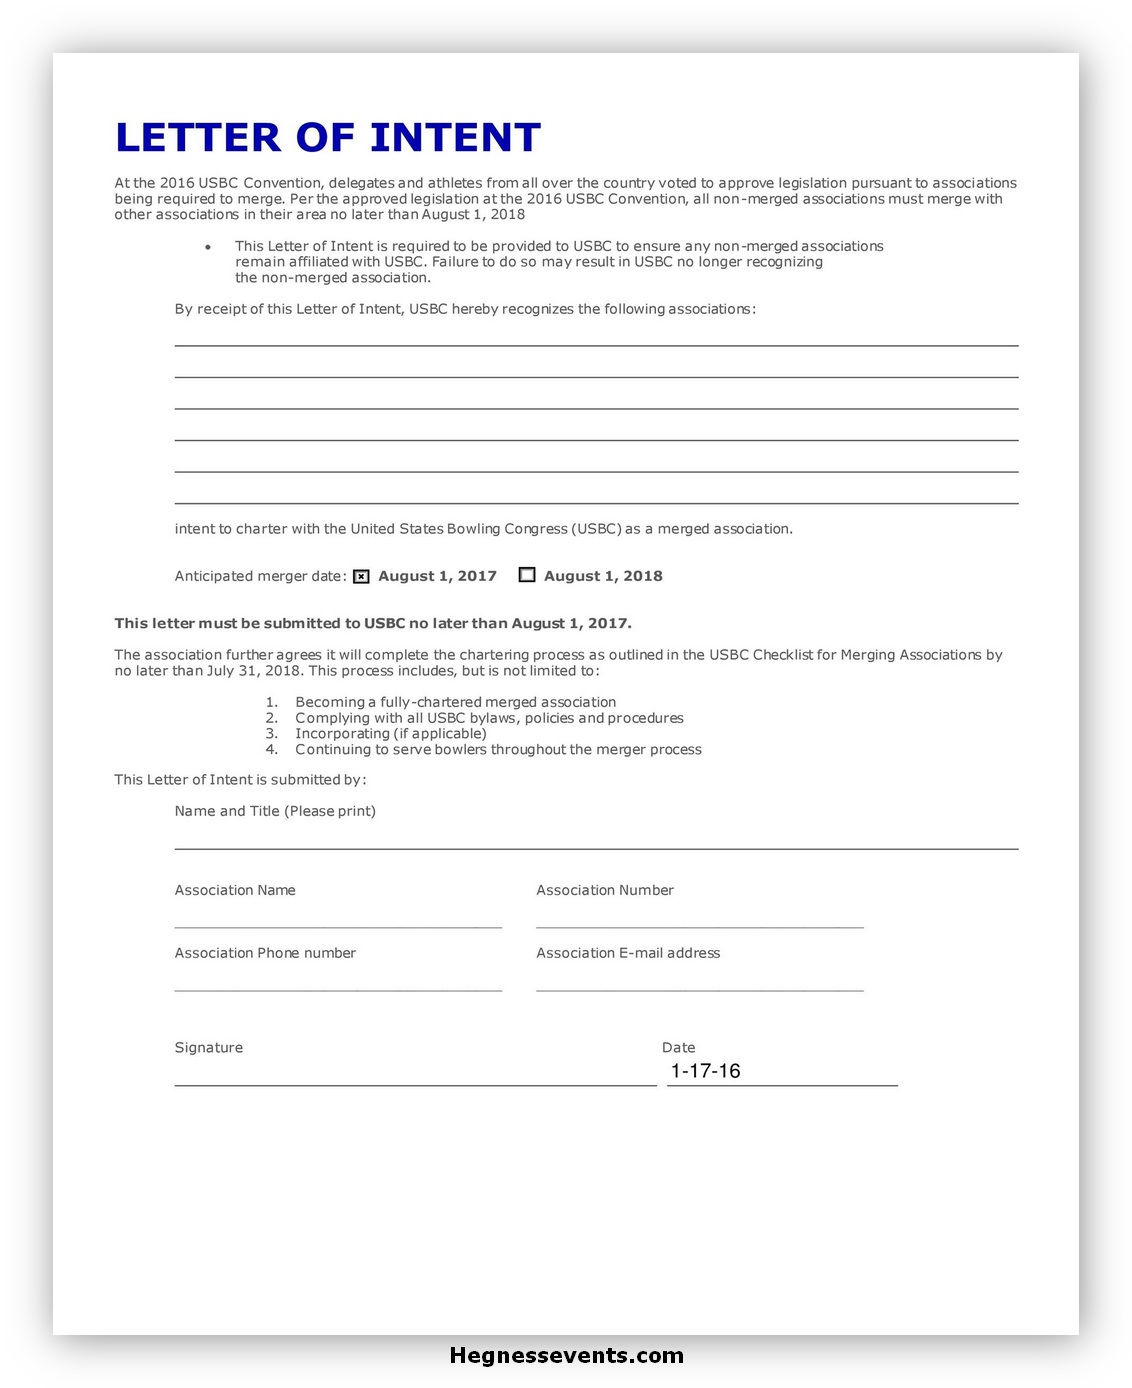 Letter of Intent Template 01